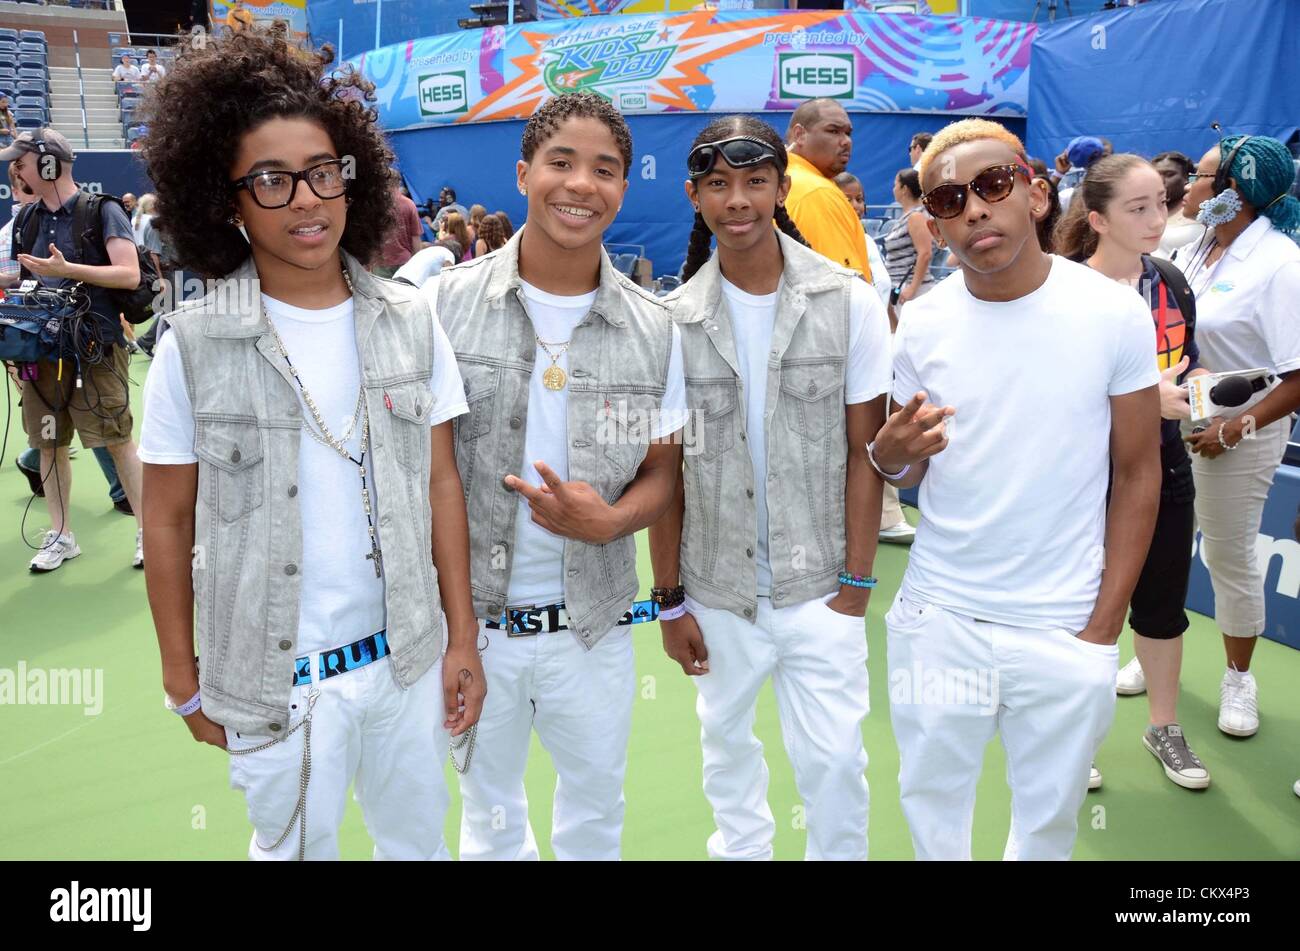 25th Aug 2012. Mindless Behavior, Princeton, Roc Royal, Ray Ray, Prodigy in attendance for 2012 Arthur Ashe Kids' Day, USTA Billie Jean King National Tennis Center, Flushing, NY August 25, 2012. Photo By: Derek Storm/Everett Collection Stock Photo